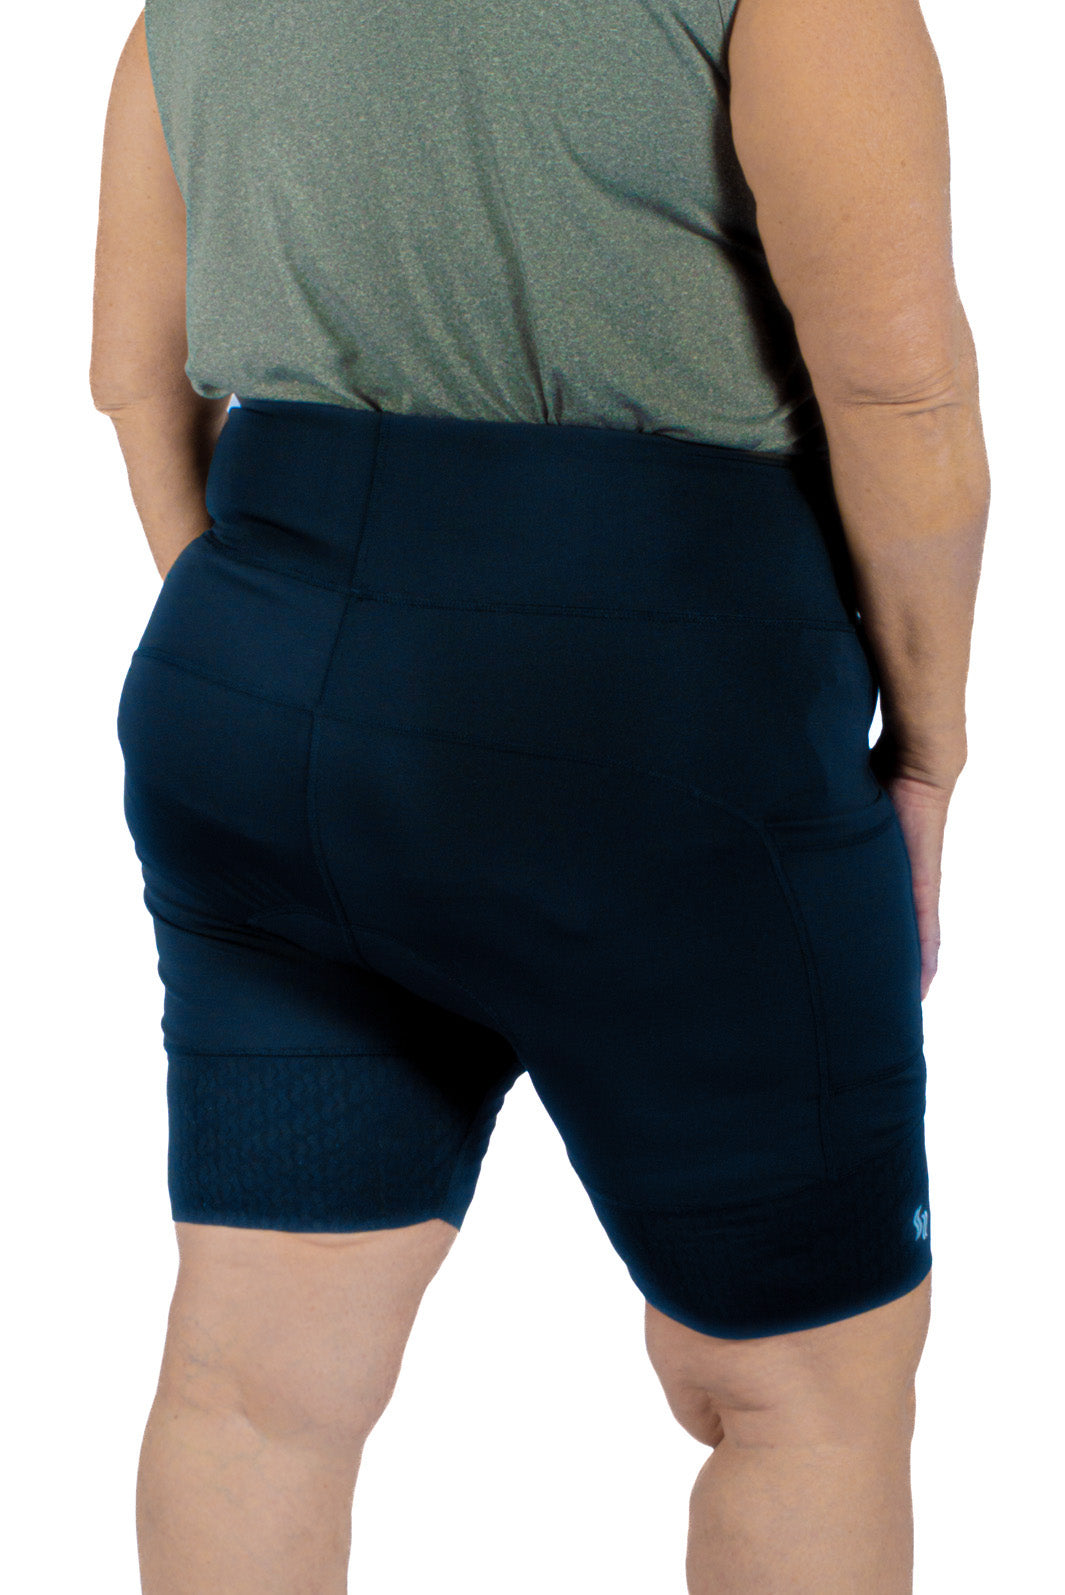 Plus Size Cycling Latitude Shorts from Sportive Plus